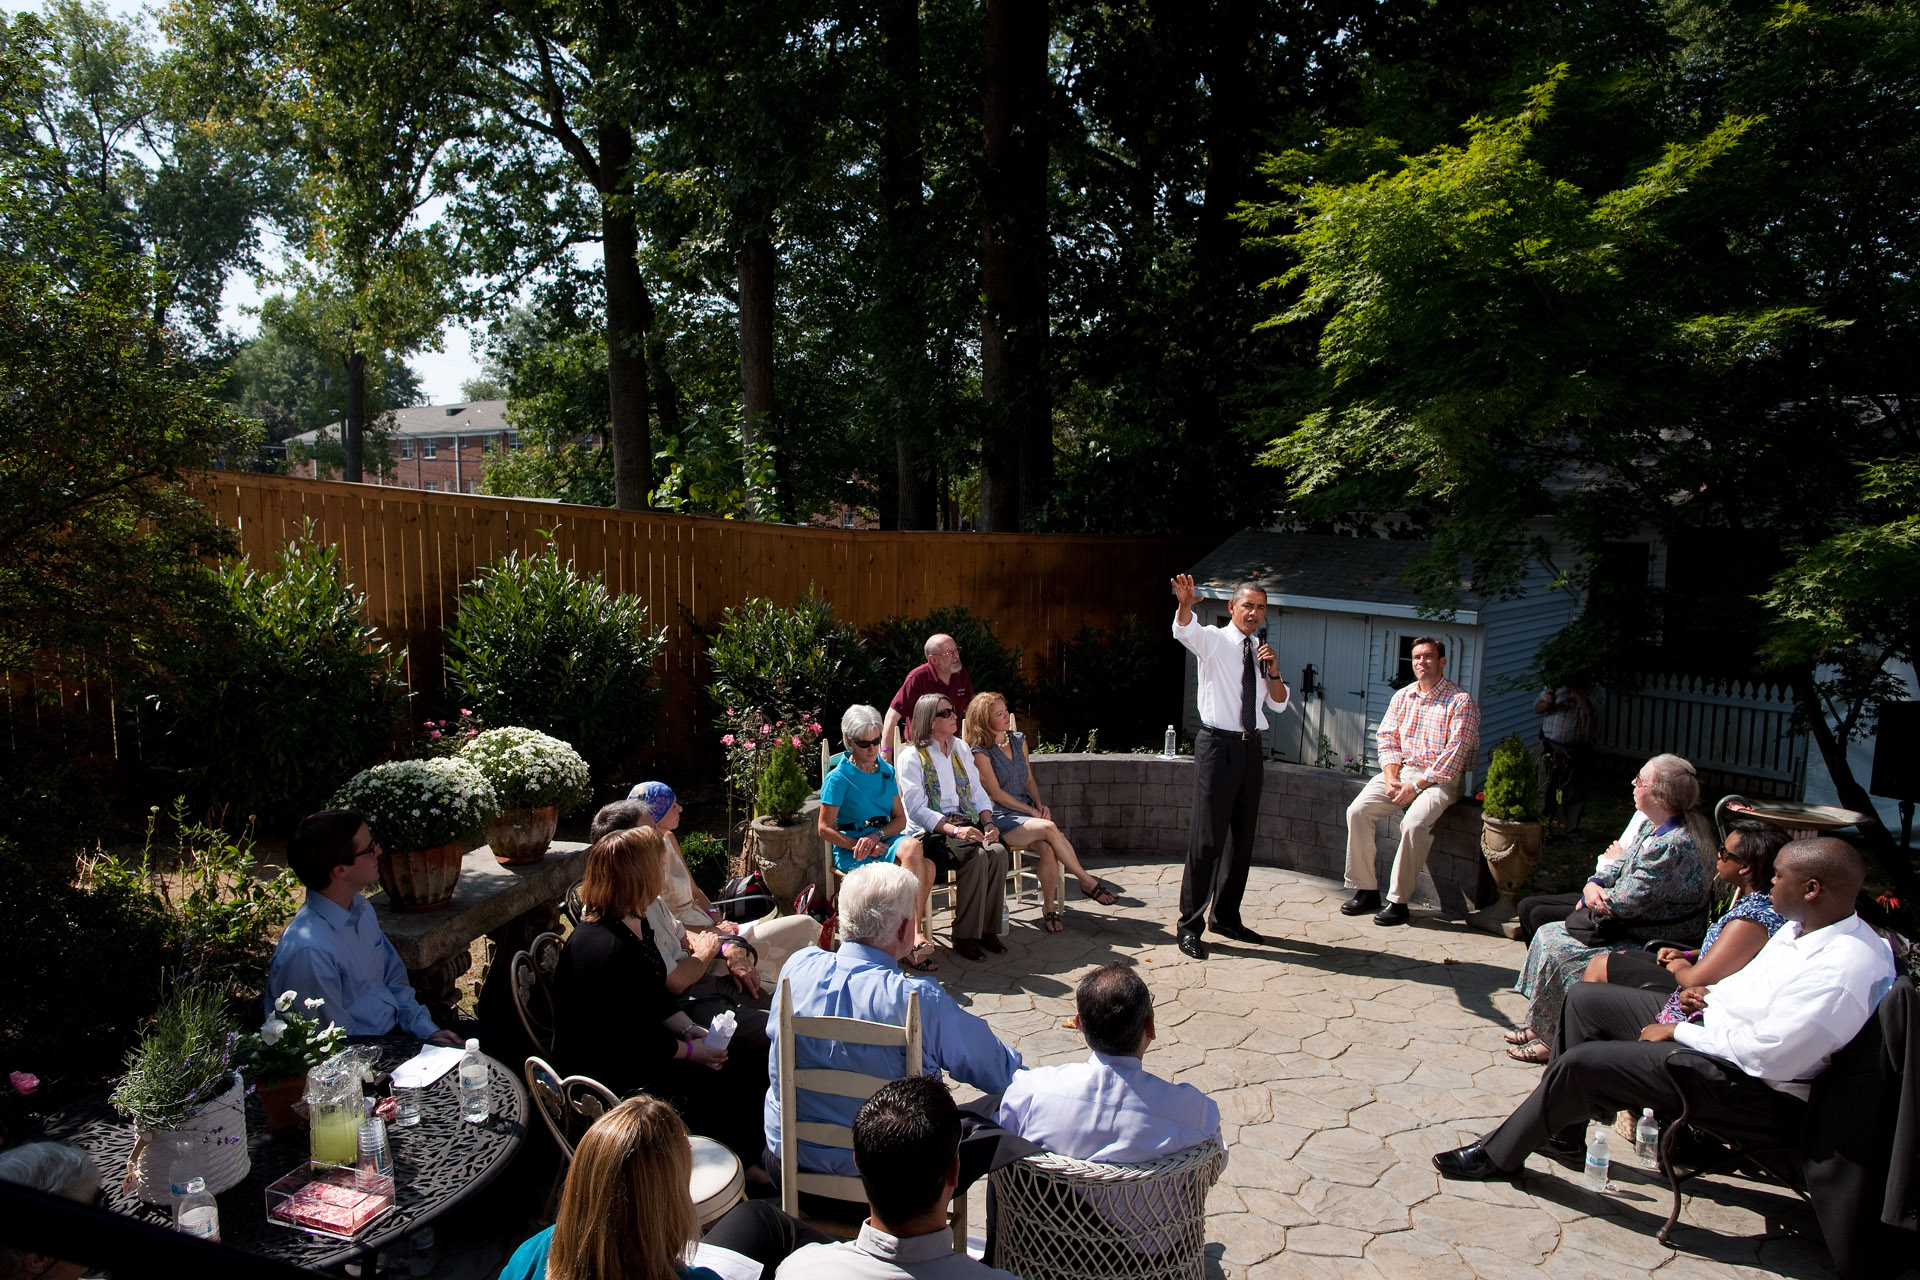 President Barack Obama delivers remarks on health care reform at the Brayshaw residence in Falls Church, Va.